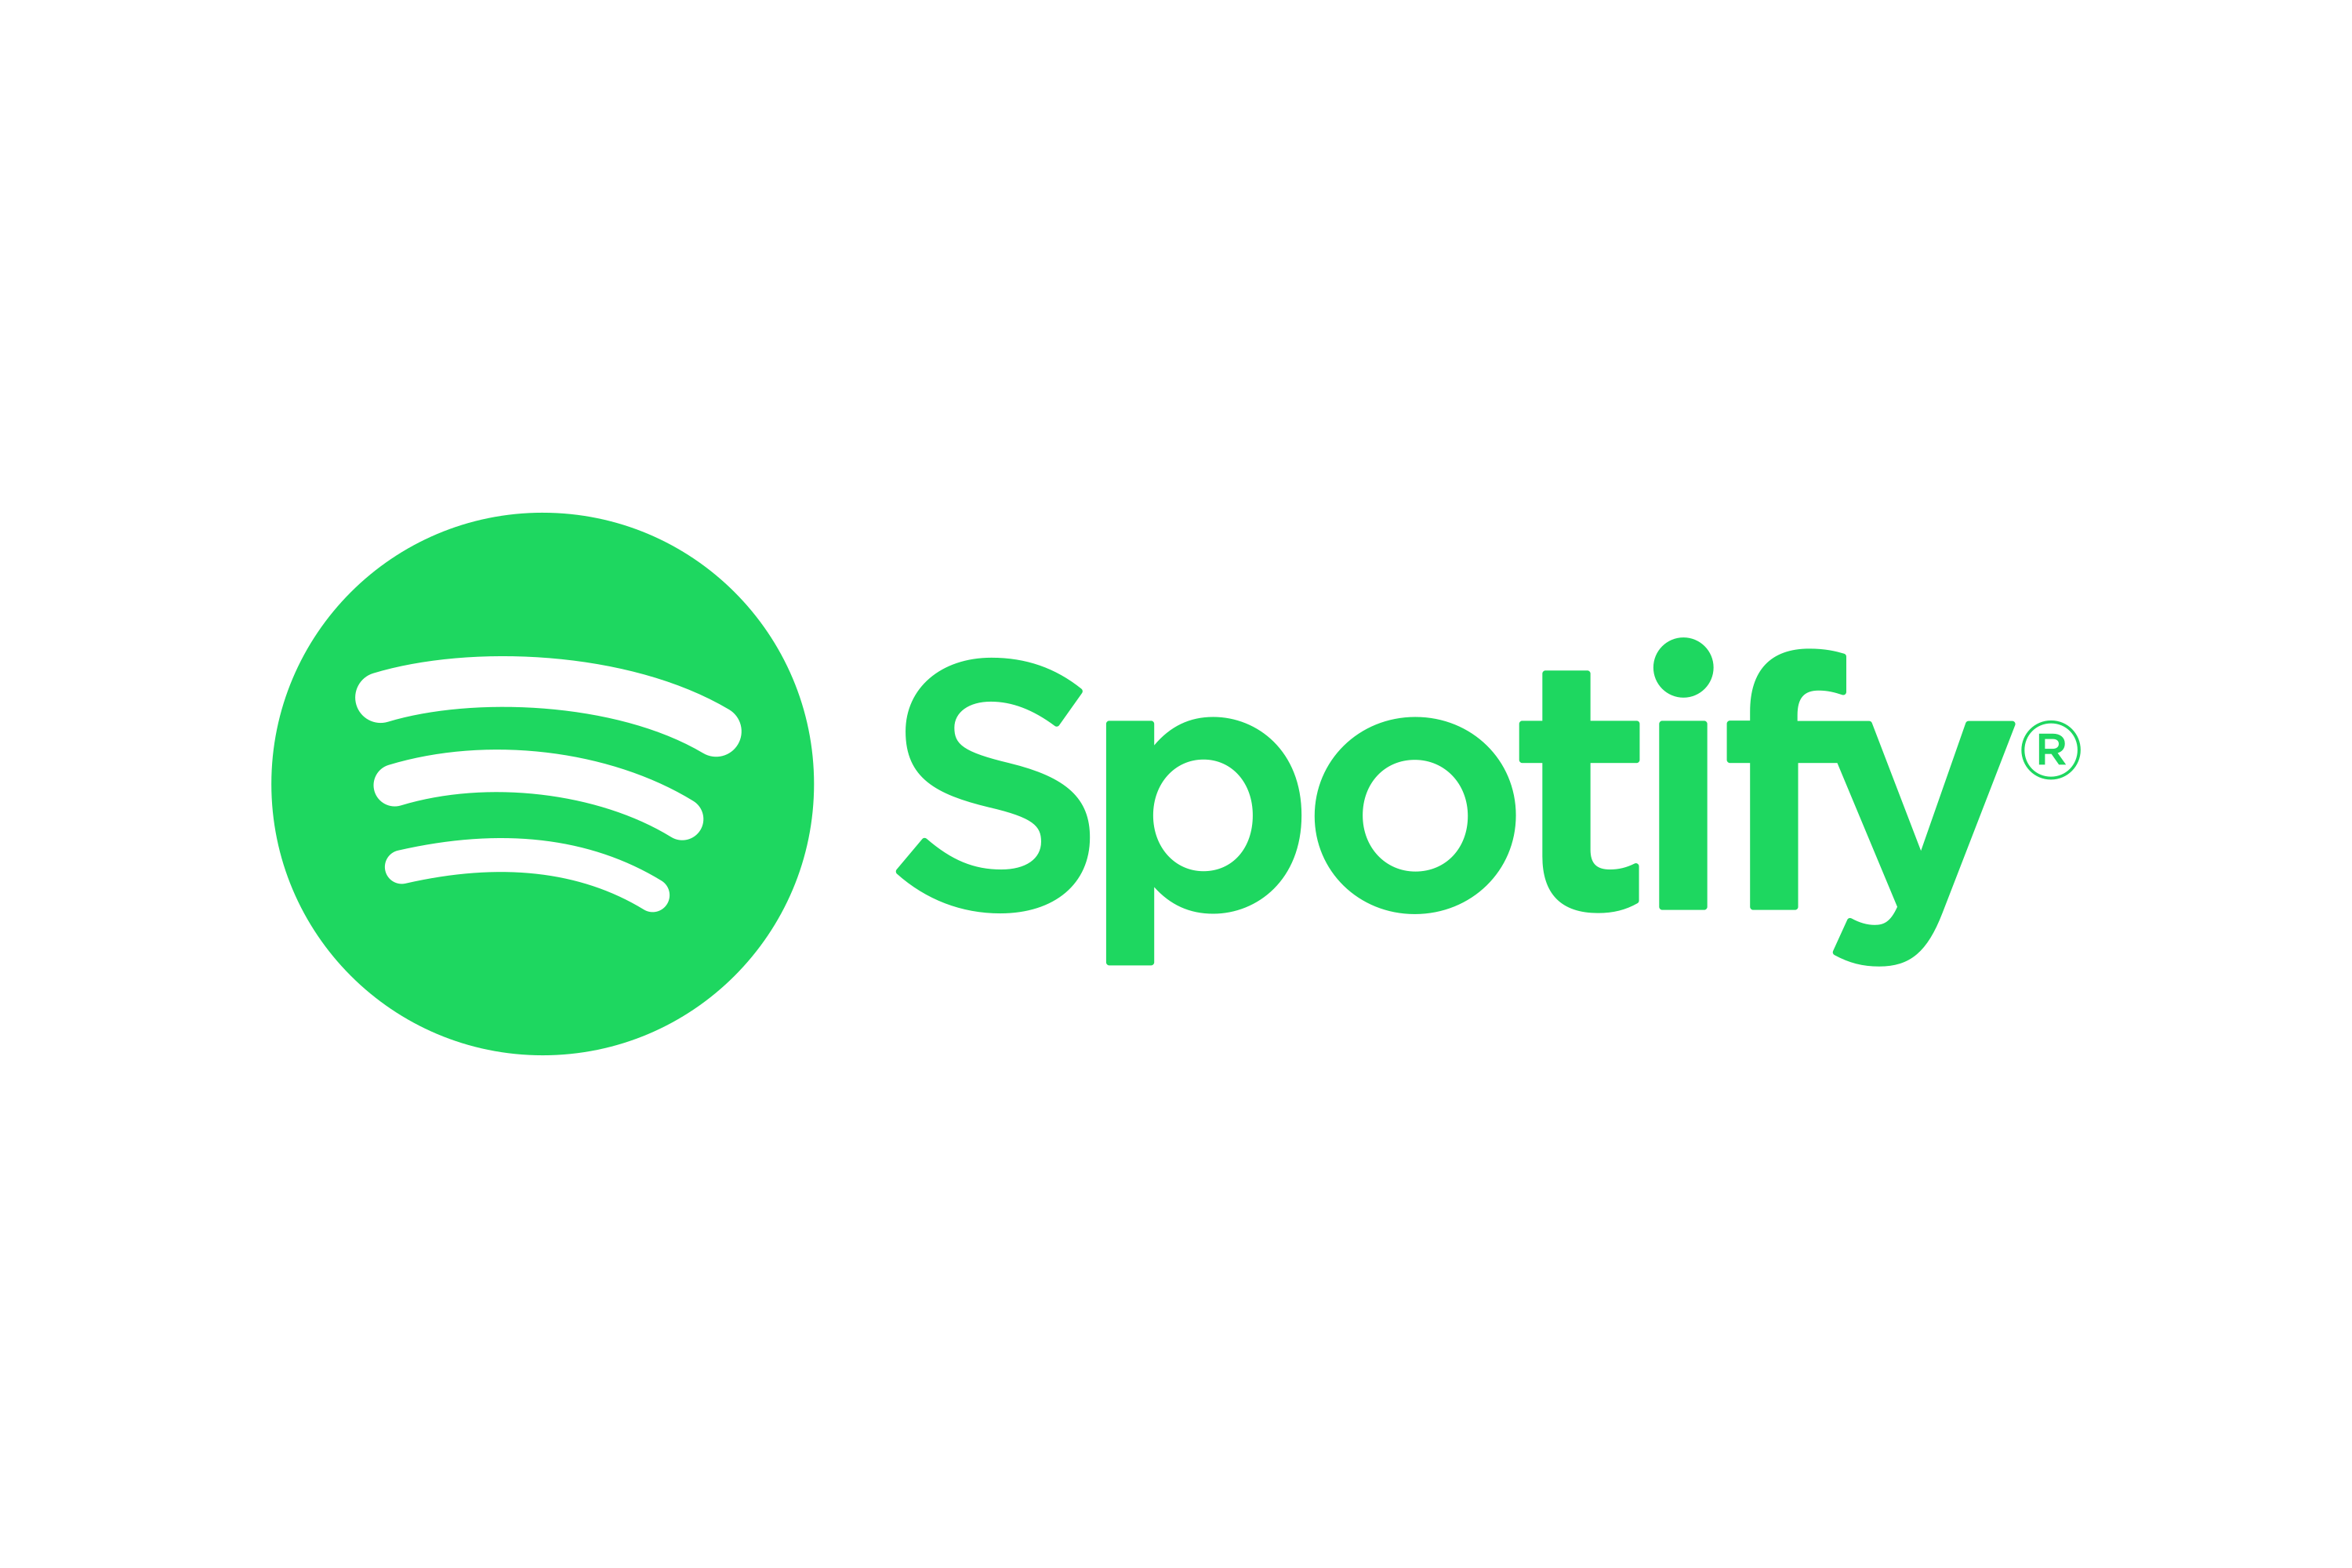 Download Spotify Logo in SVG Vector or PNG File Format 